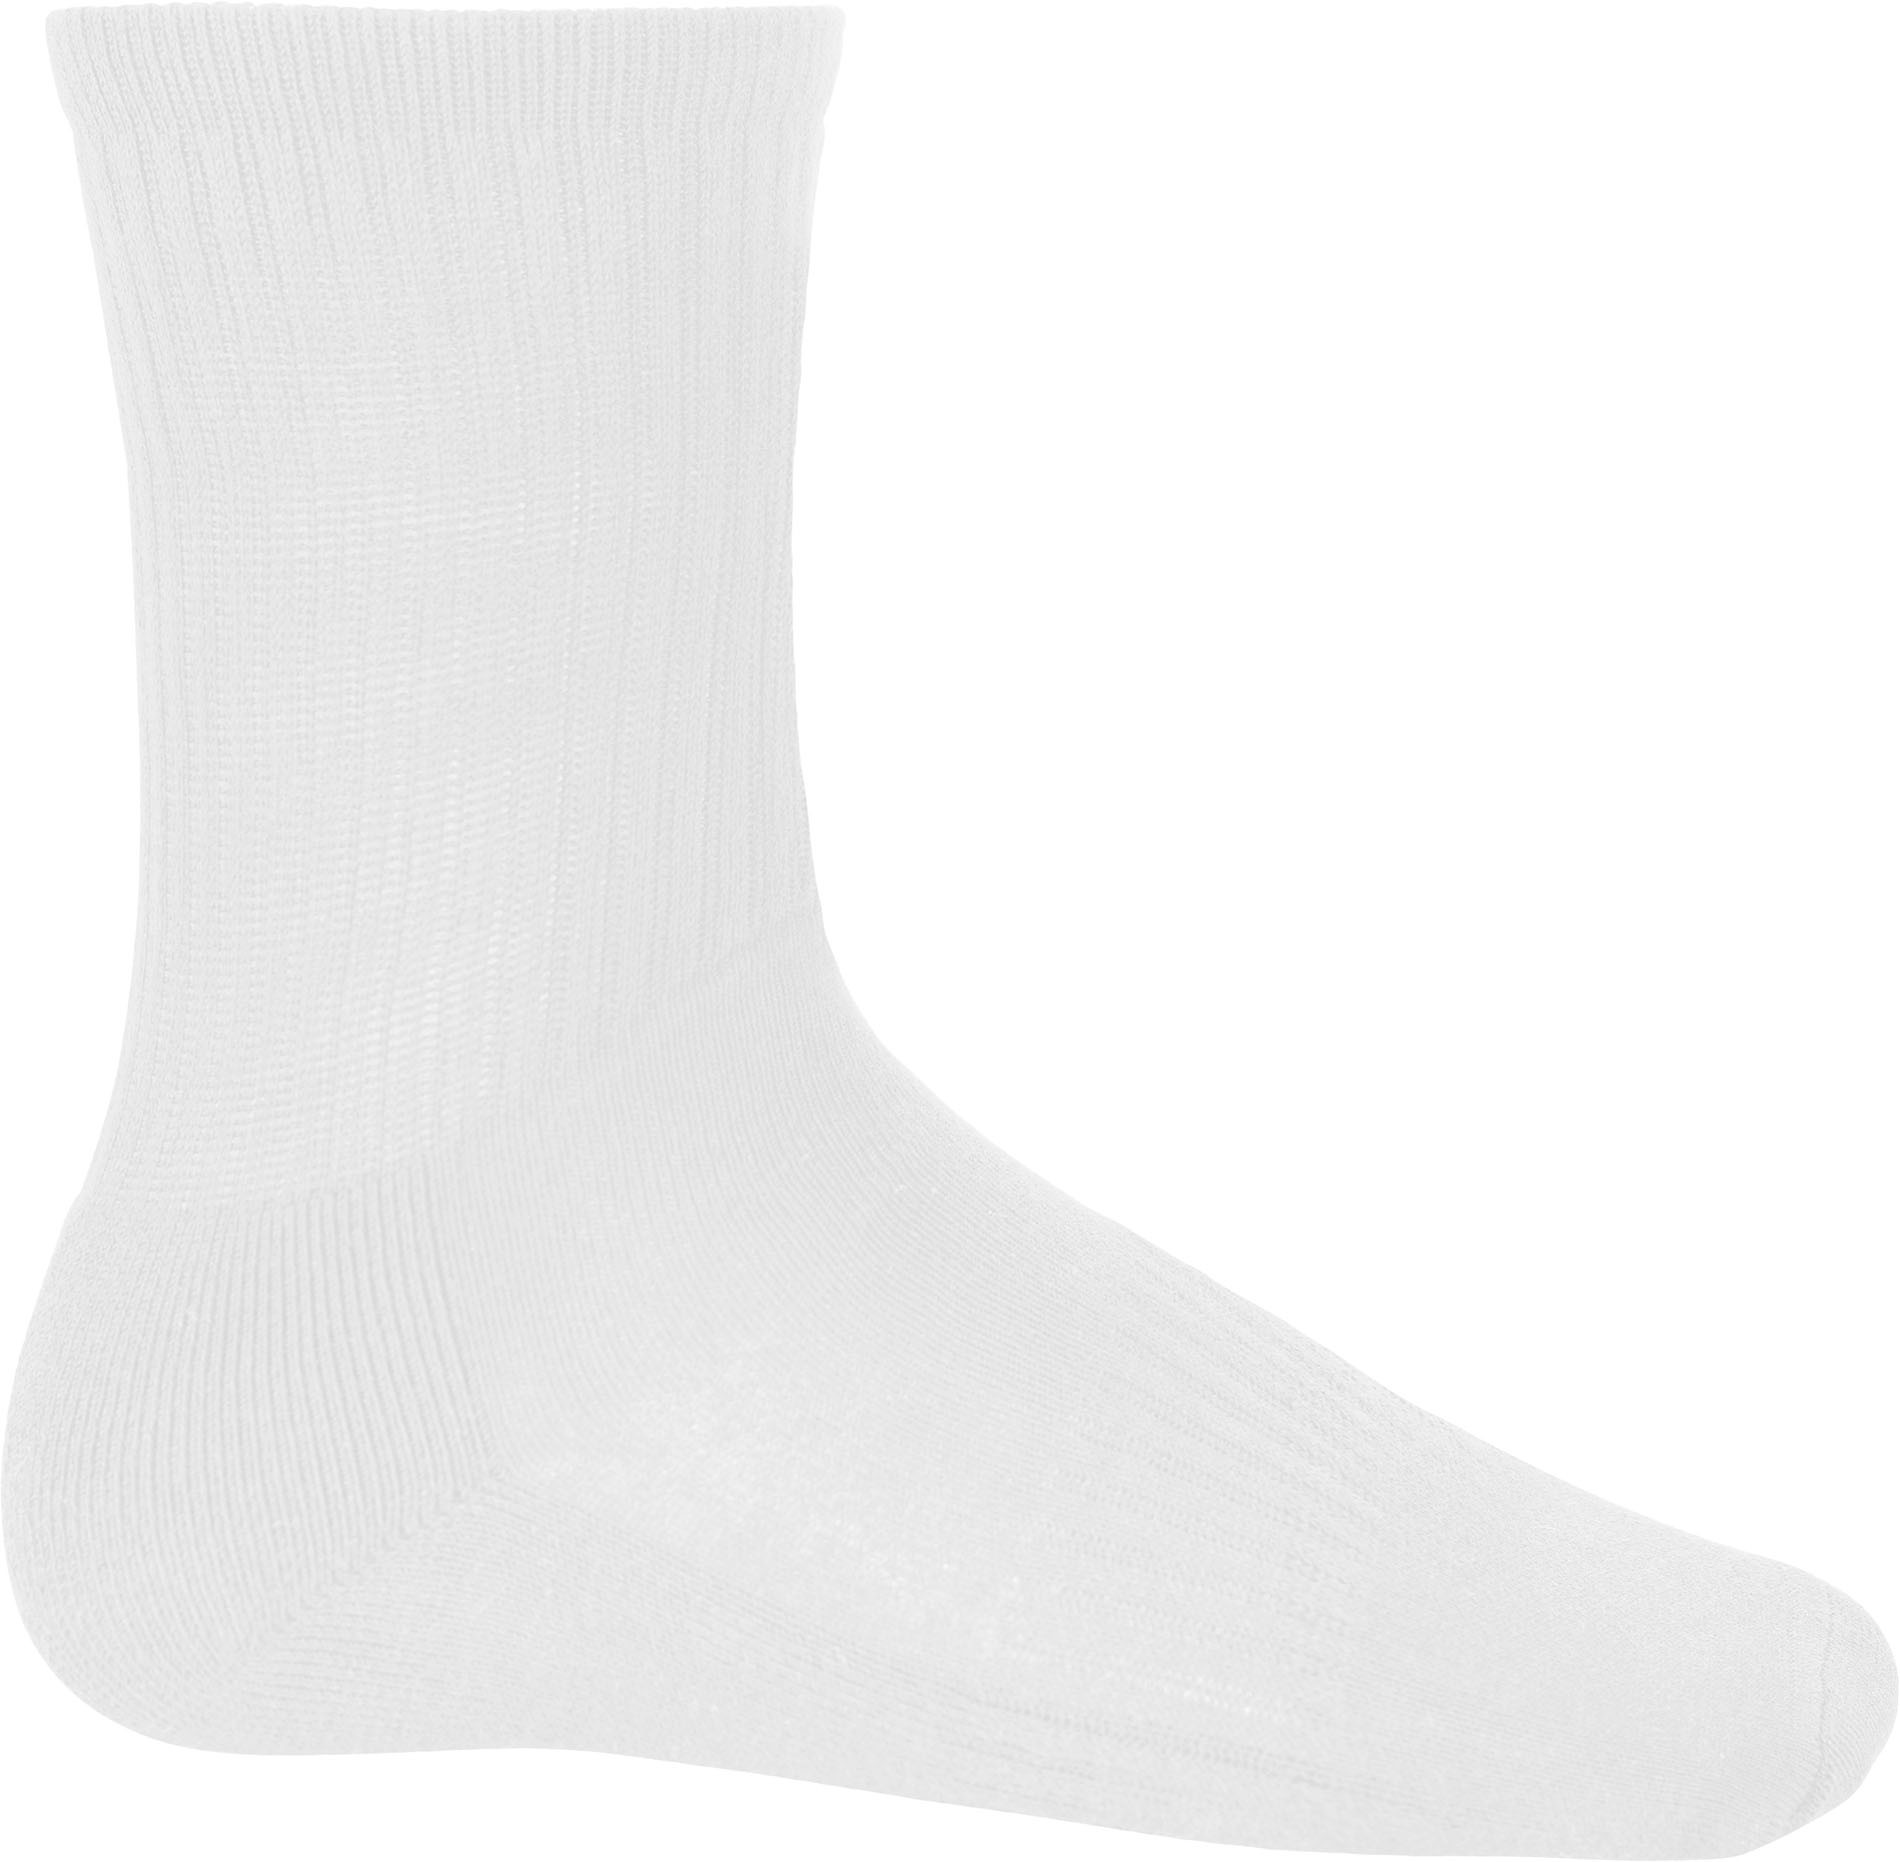 Chaussettes Multisports